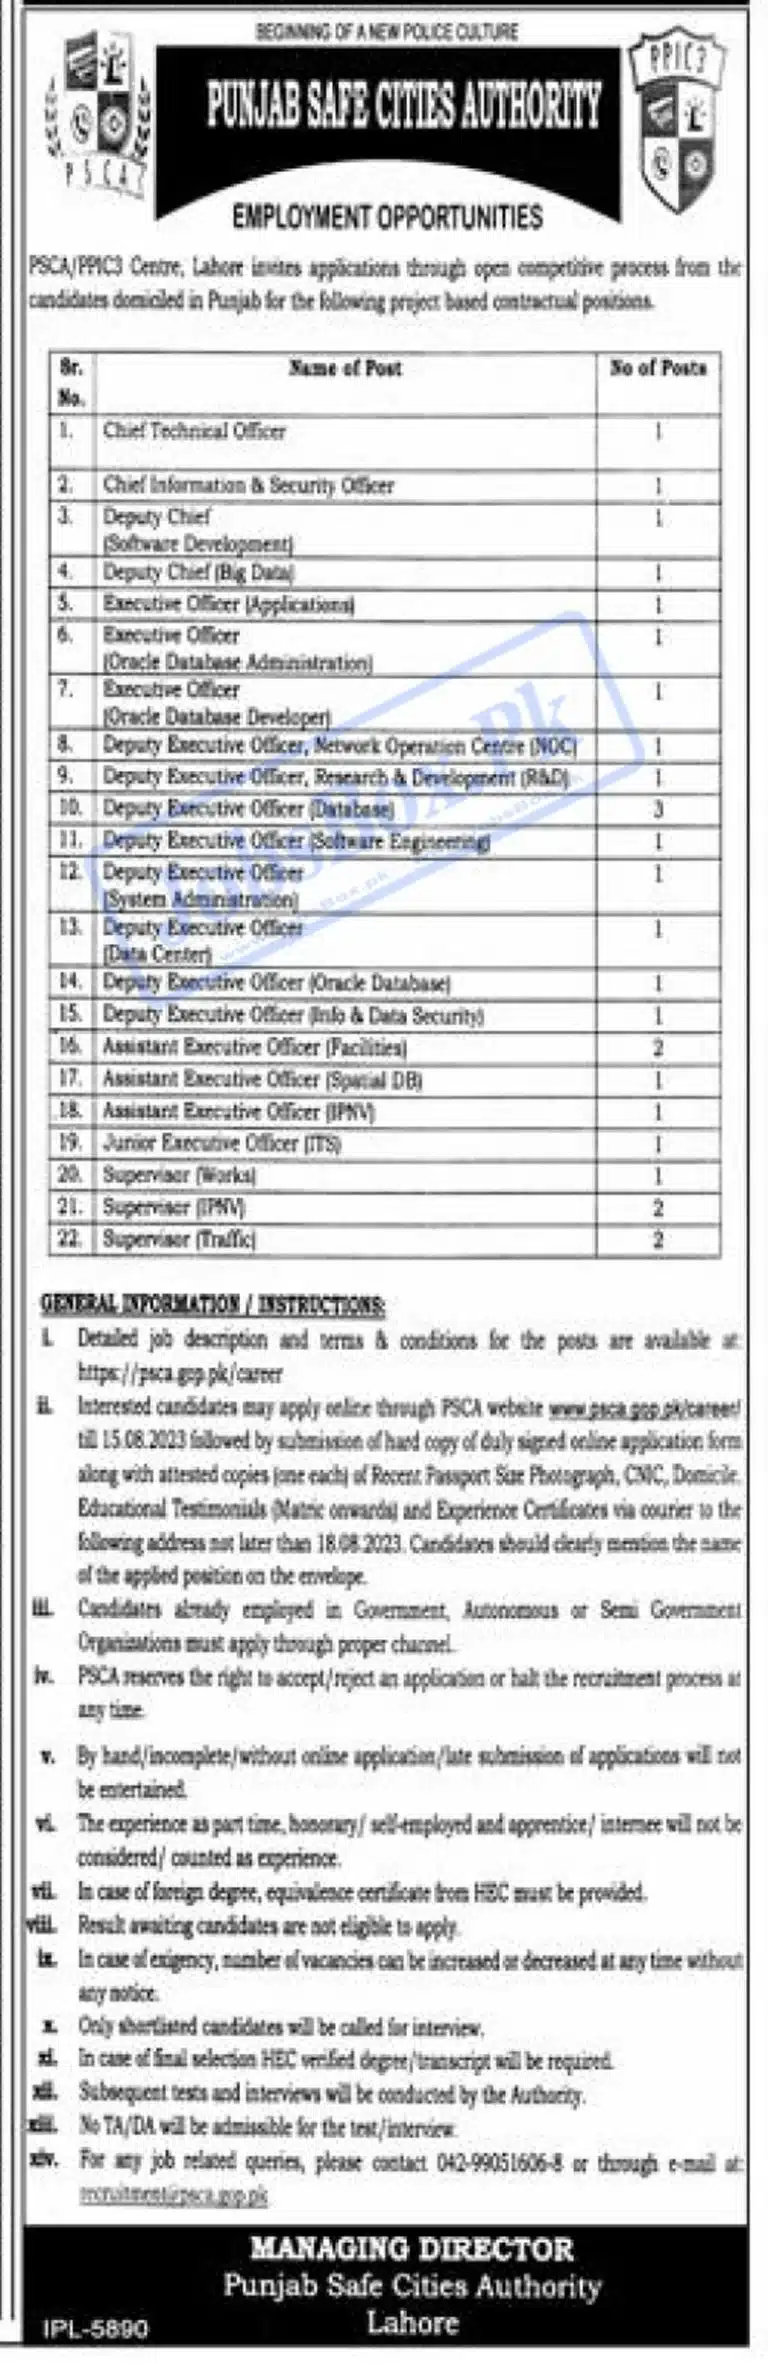 Latest PSCA Jobs Opportunities | Punjab Safe City Authority Jobs